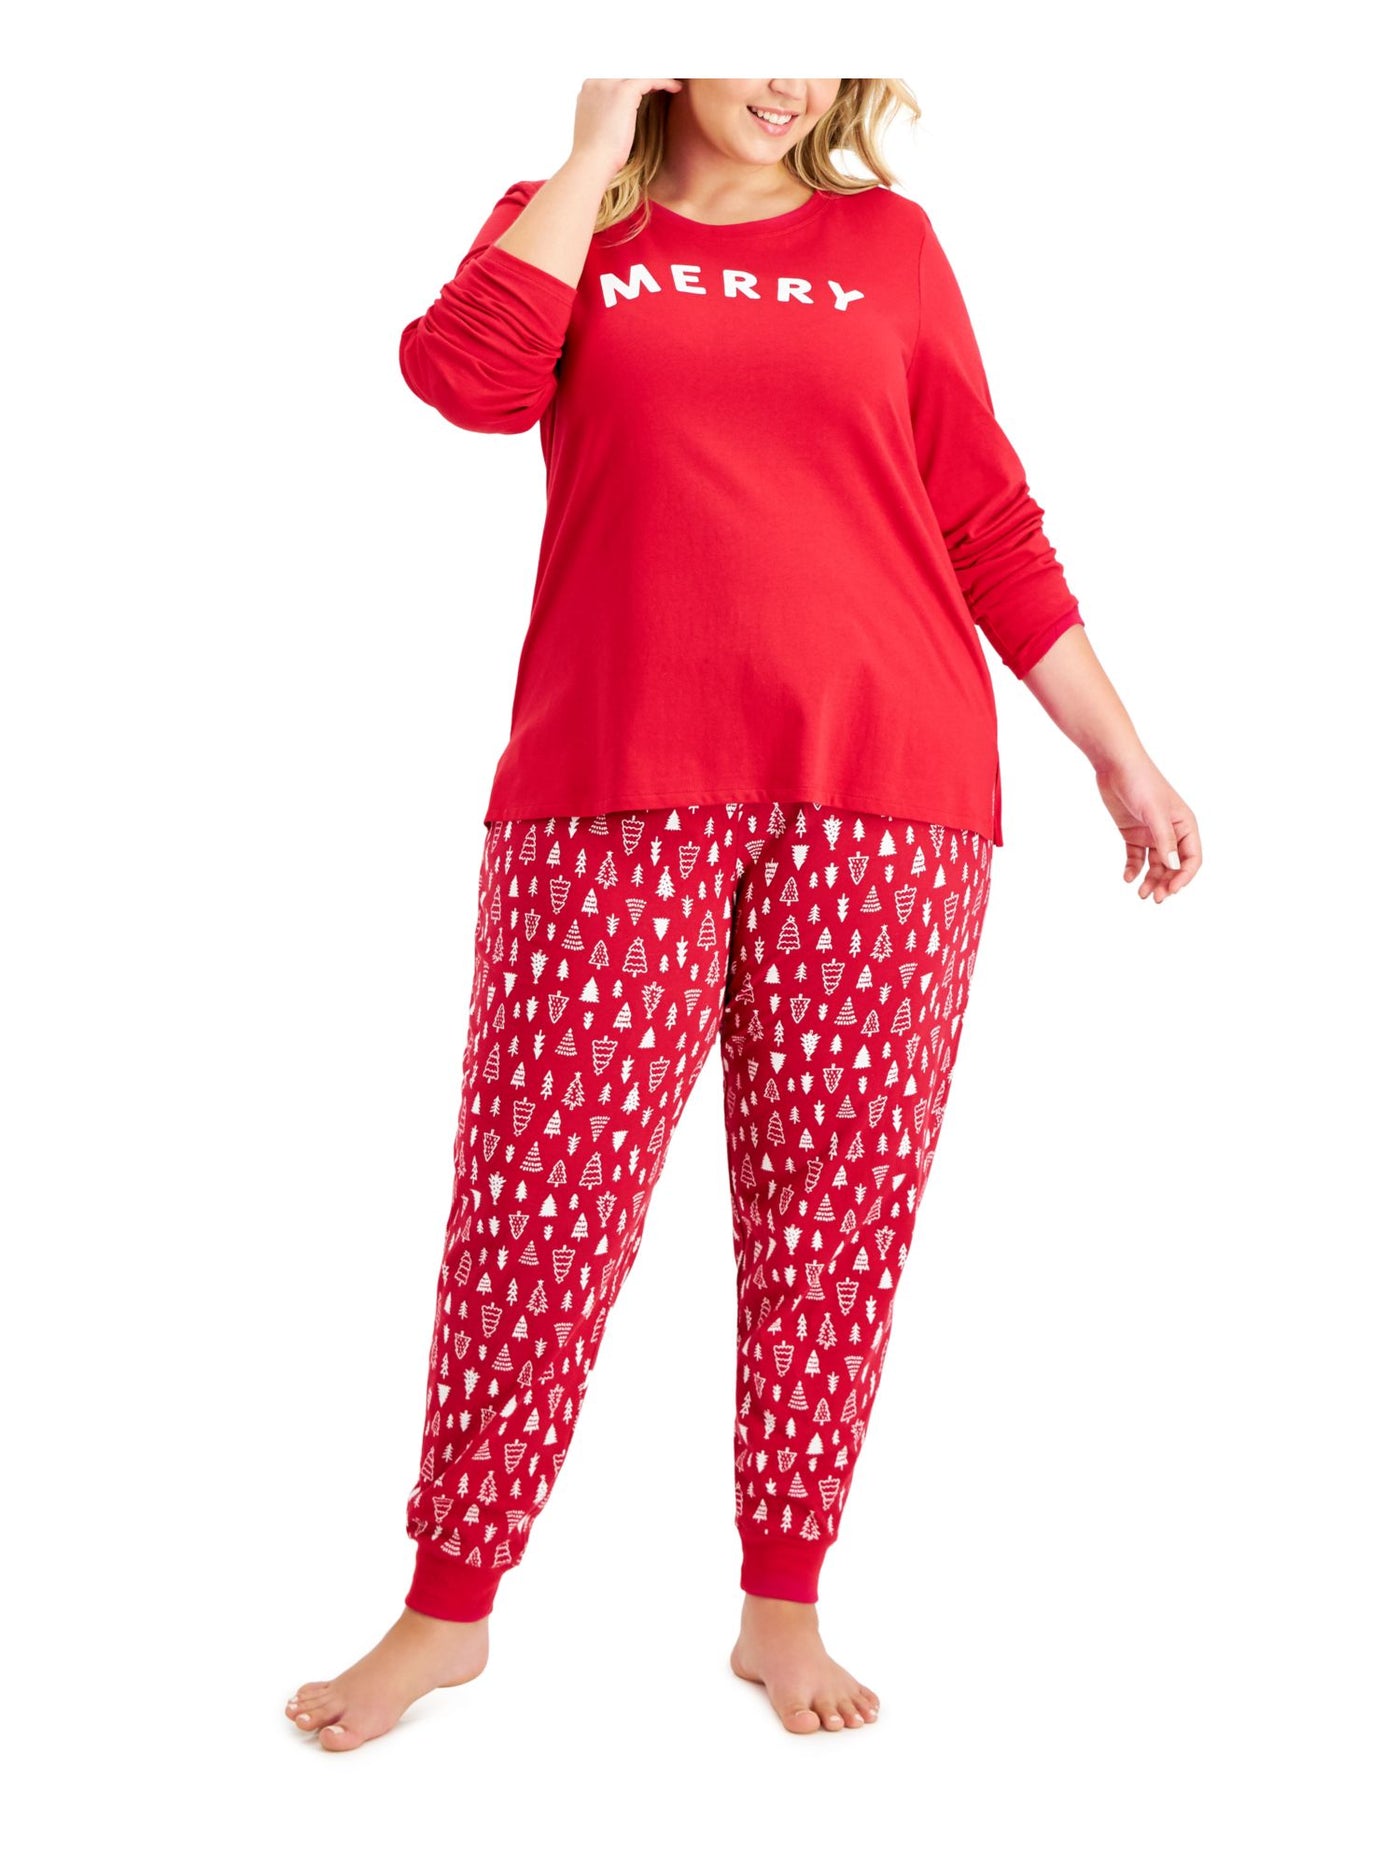 FAMILY PJs Womens Red Graphic Elastic Band T-Shirt Top Cuffed Pants Pajamas Plus 3X